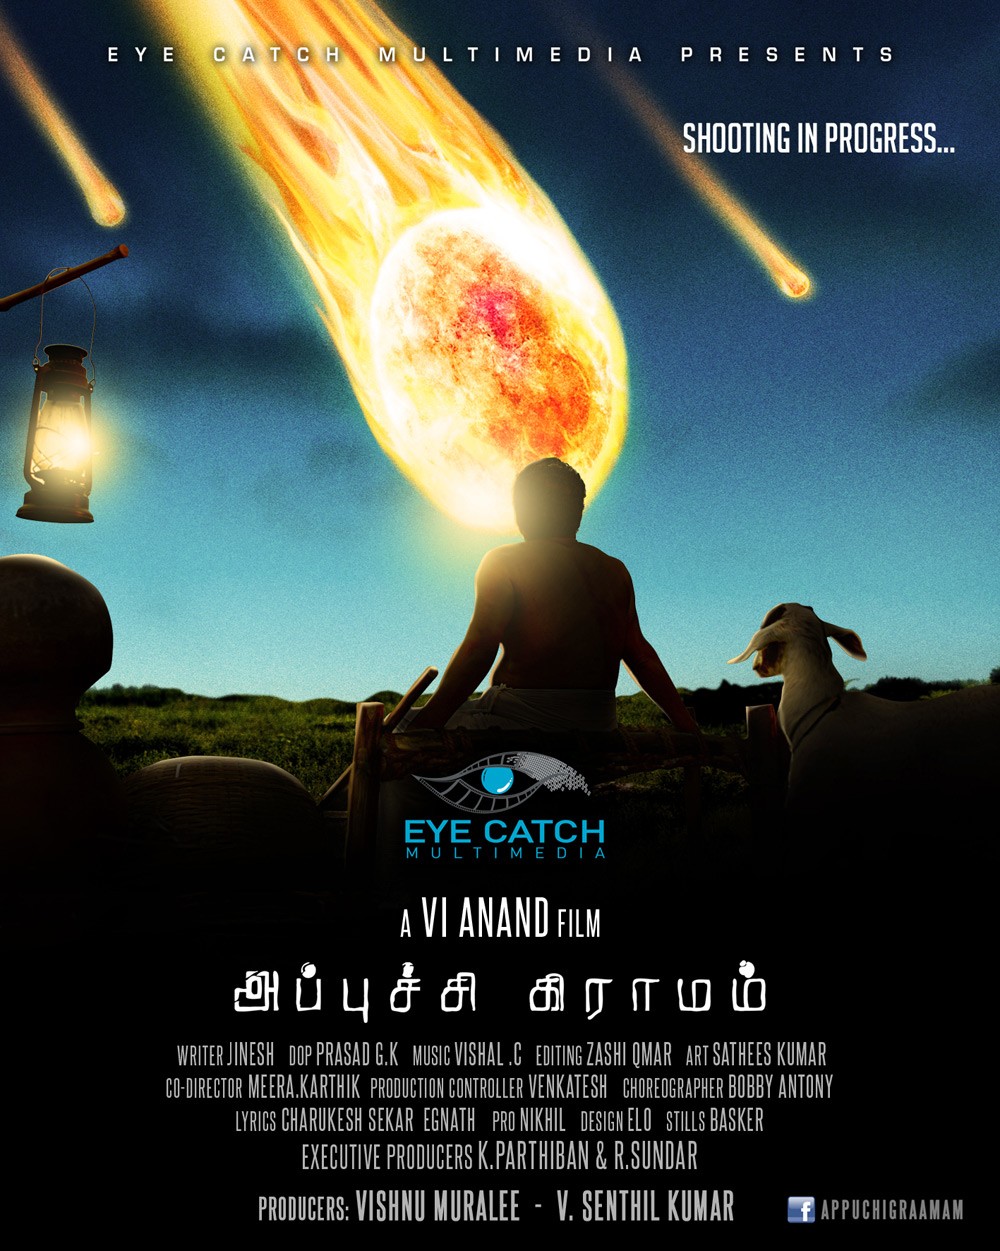 Extra Large Movie Poster Image for Appuchi Graamam (#1 of 4)